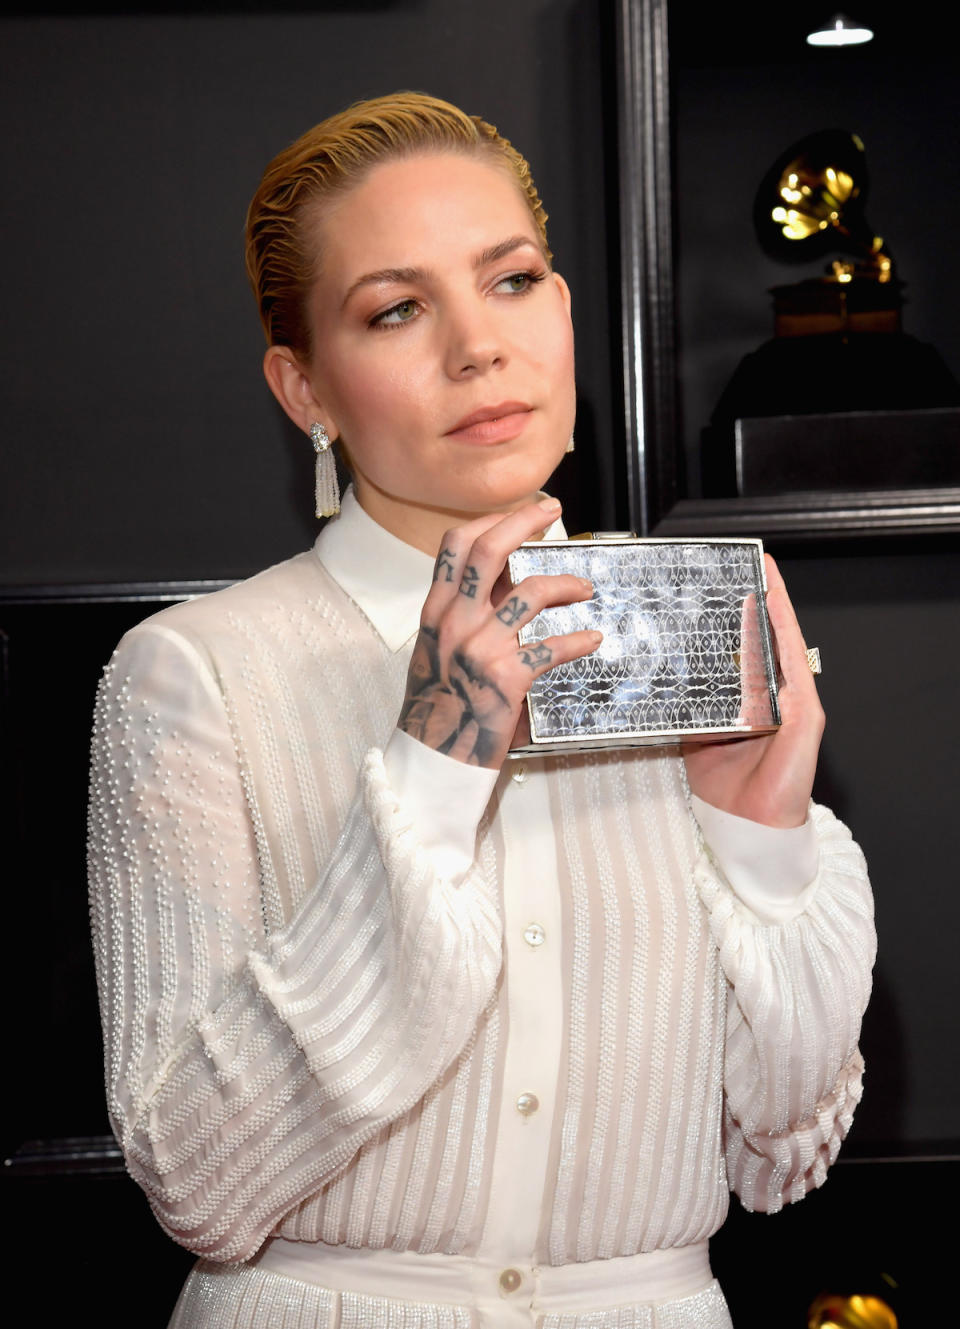 <p>Skylar Gray’s electronic bag flashed “equality” and “empowerment.” “It’s my women’s march,” she said on the red carpet. (Photo: Getty Images) </p>